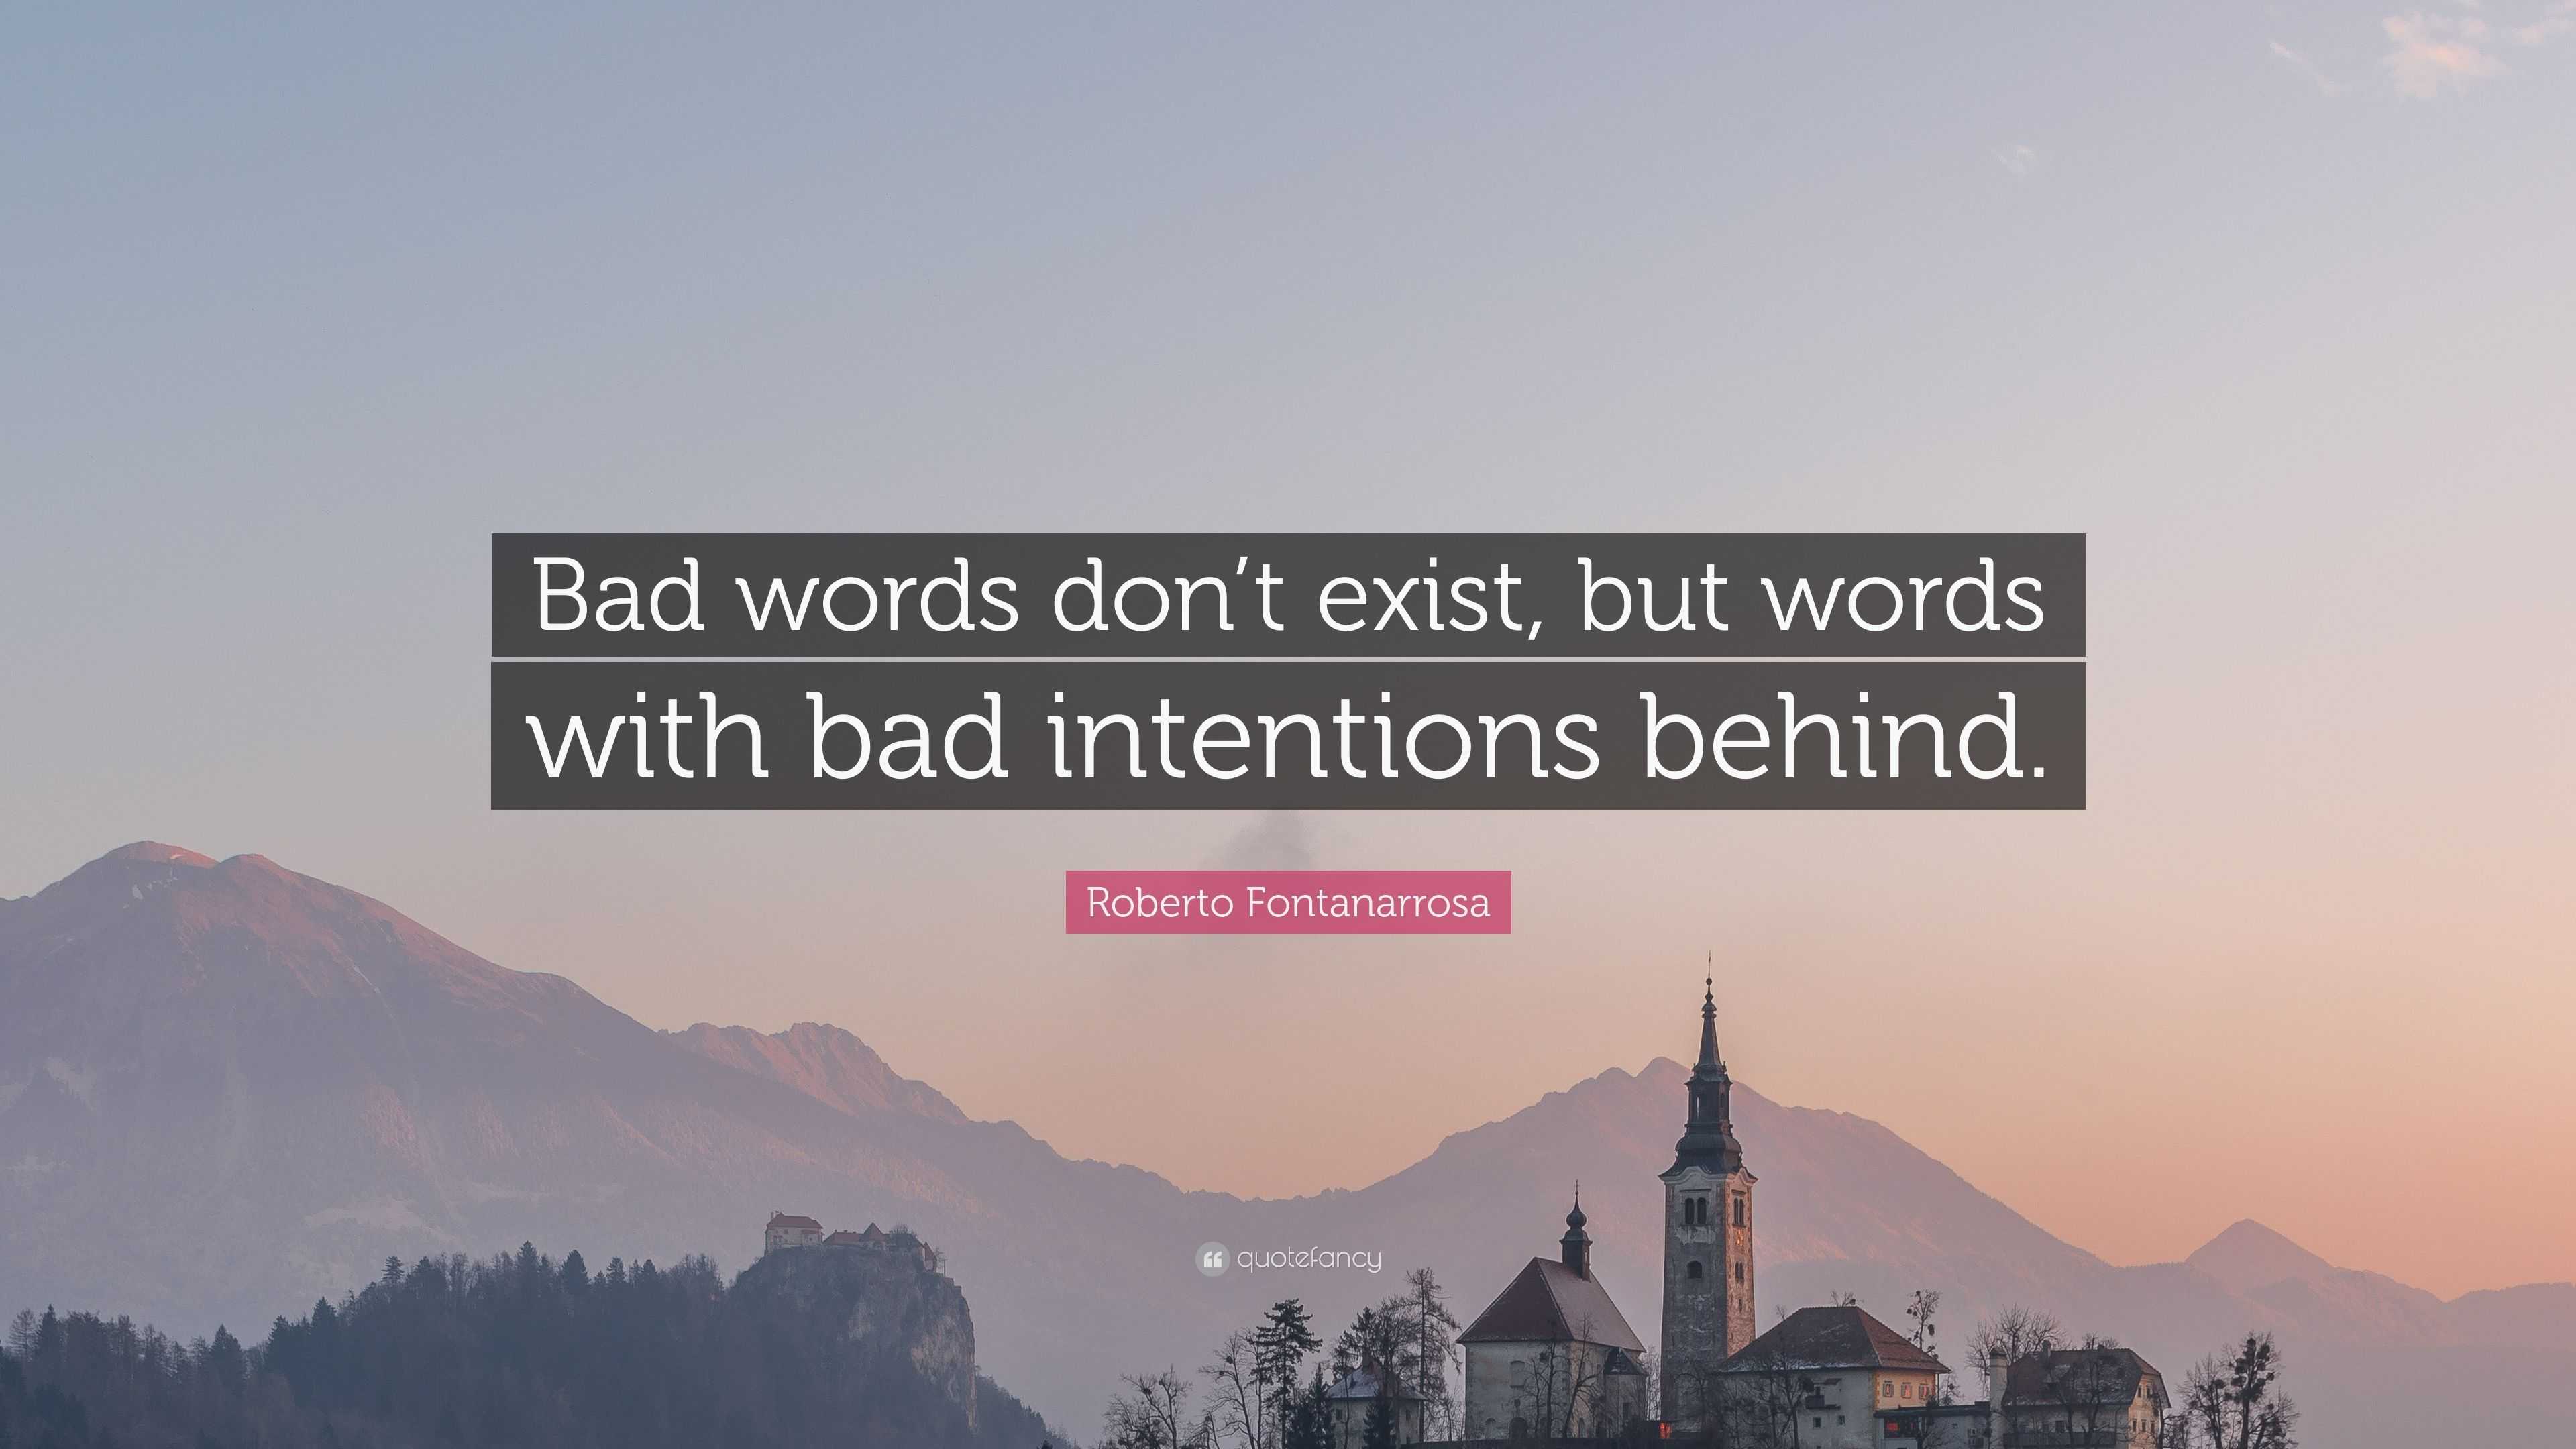 Fresh Wallpapers With Bad Words - Wallpaper Quotes